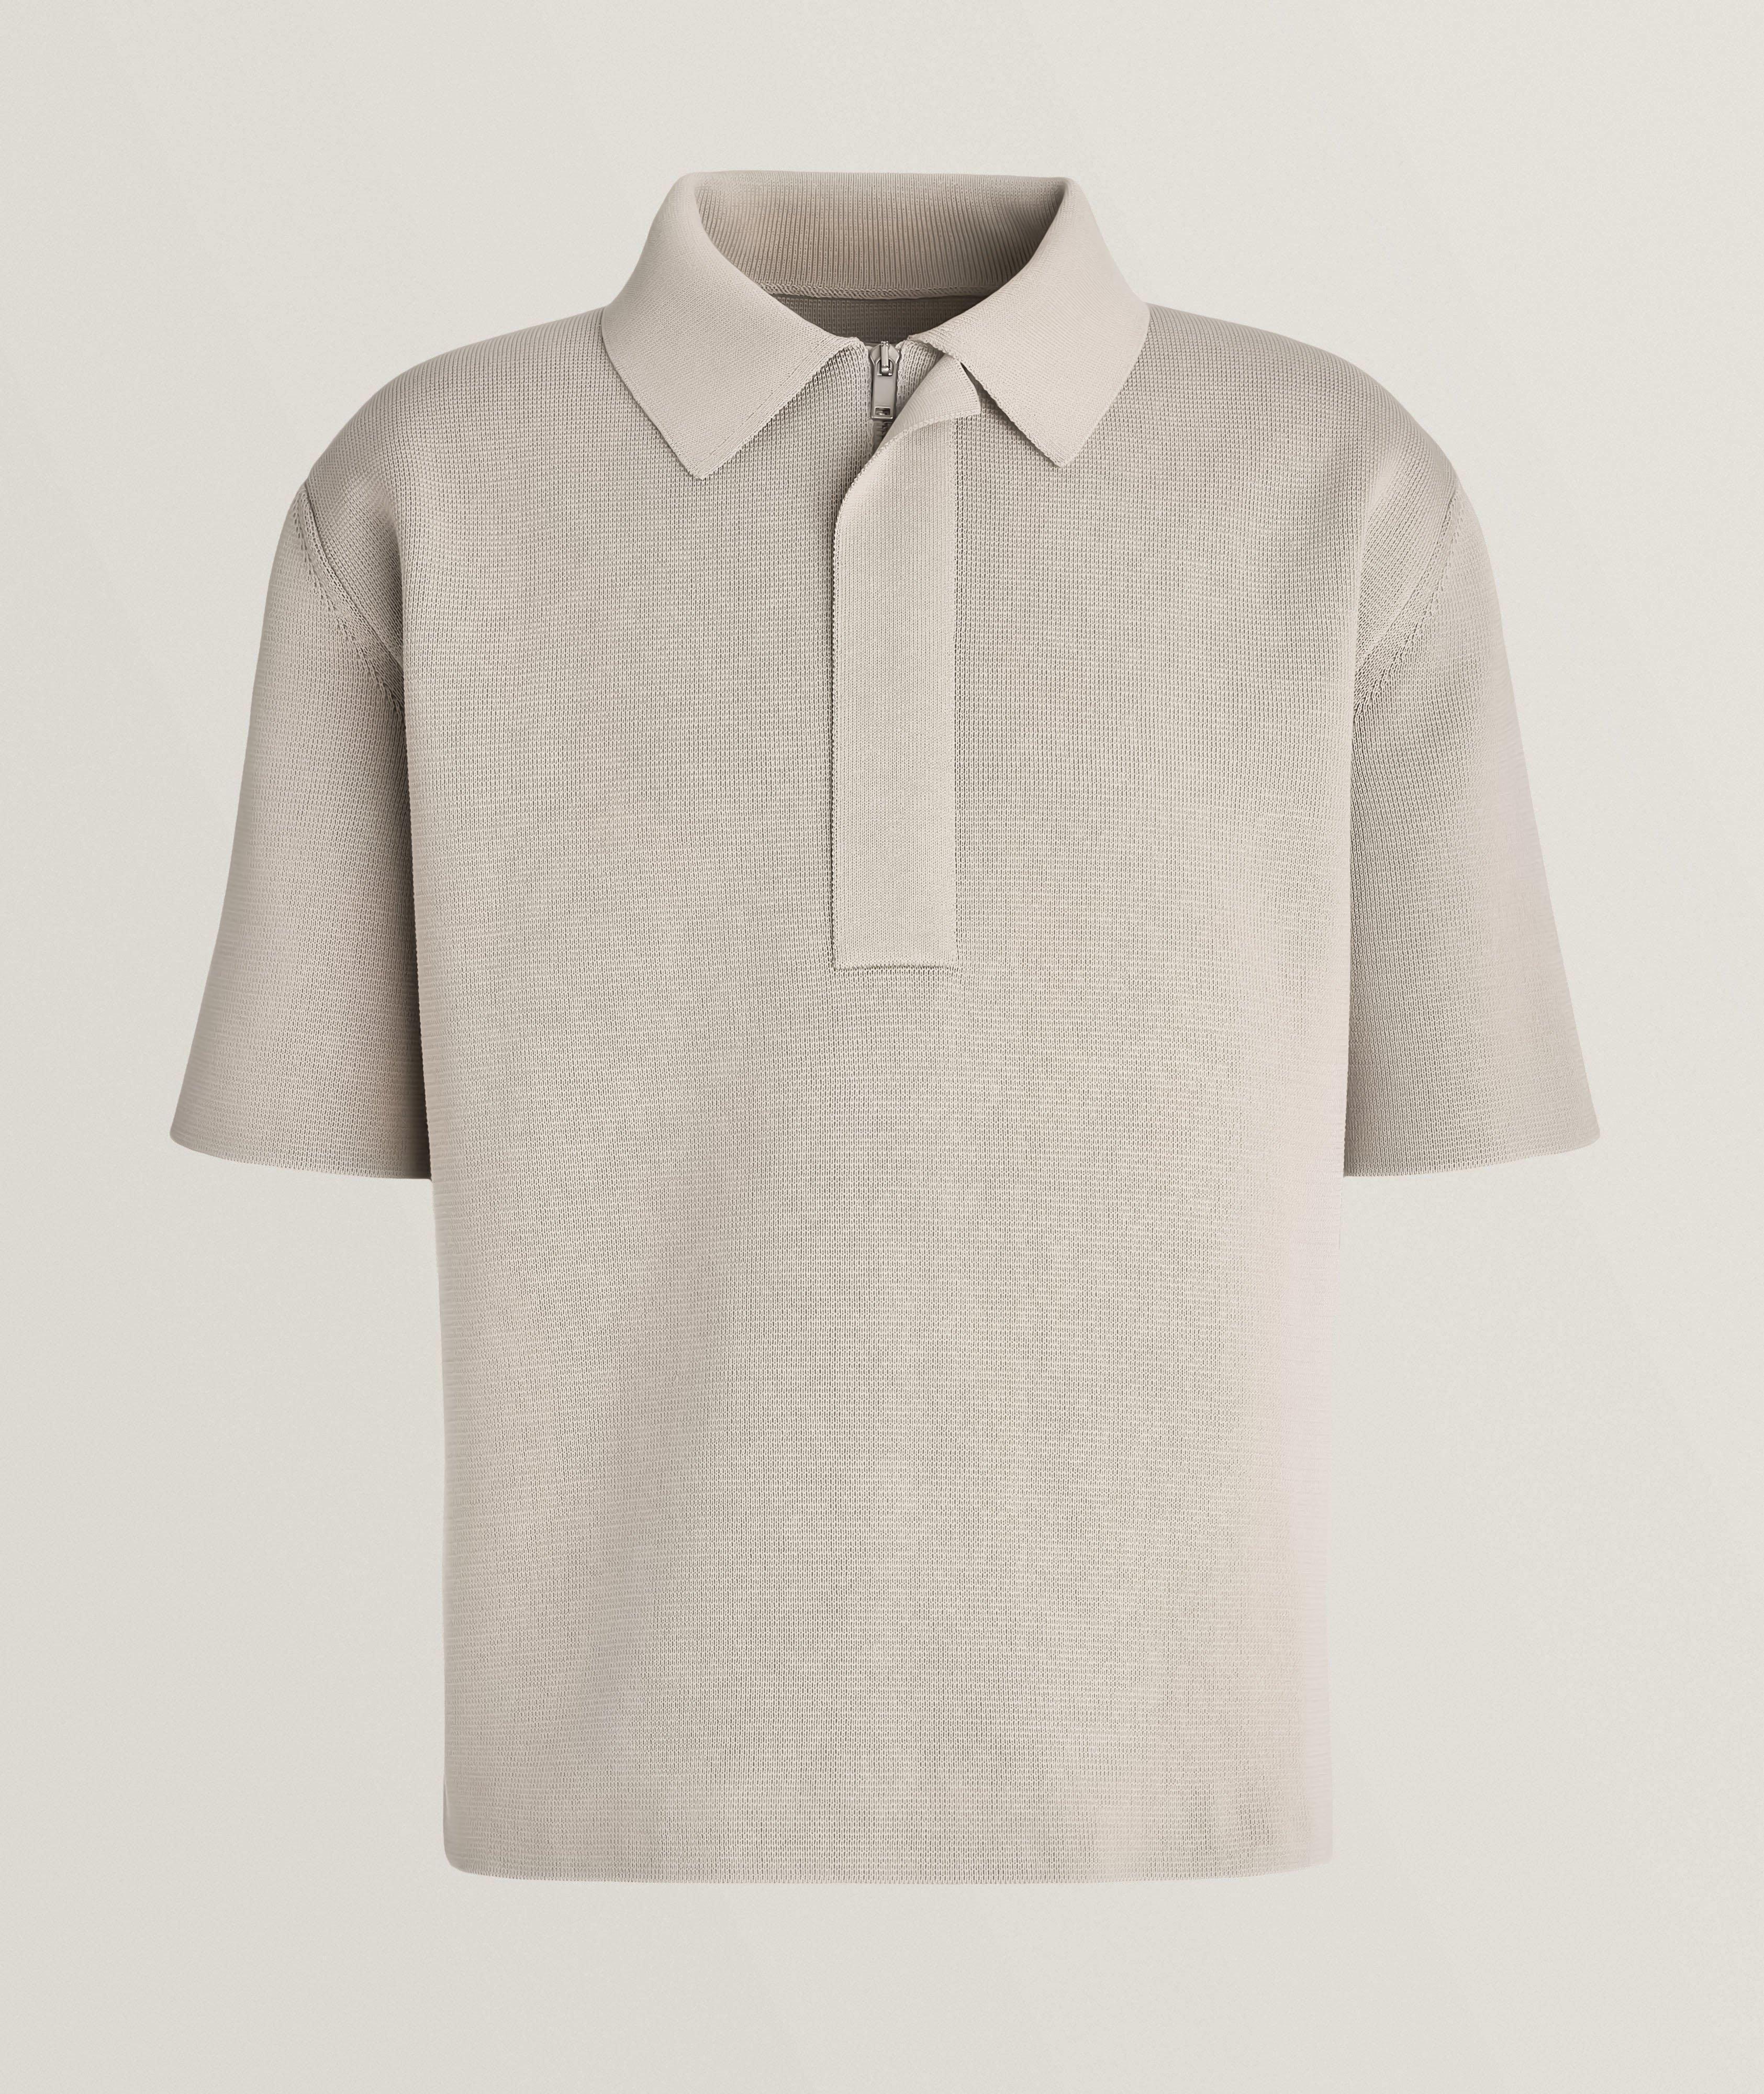 Weighted Viscose-Cotton Knit Polo  image 0